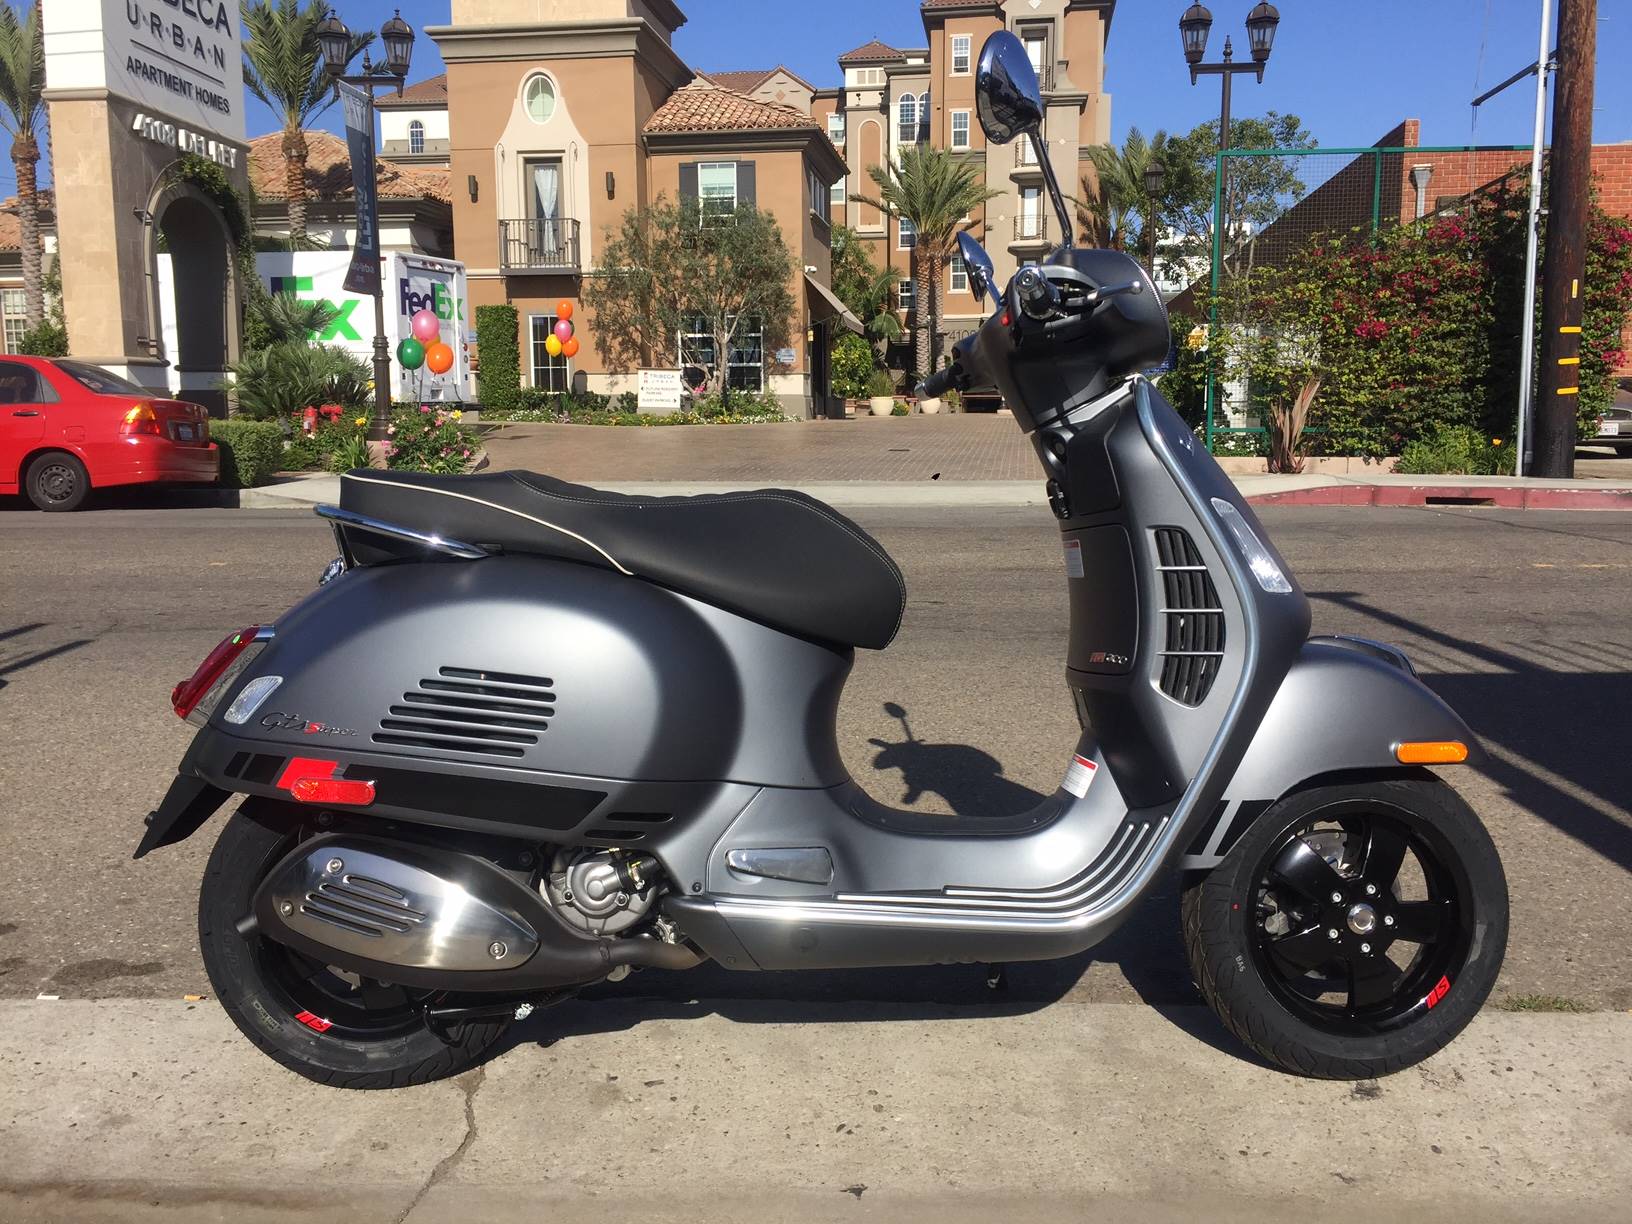 Vespa GTS 300 Super Sport Price - Better to ride a Vespa than others